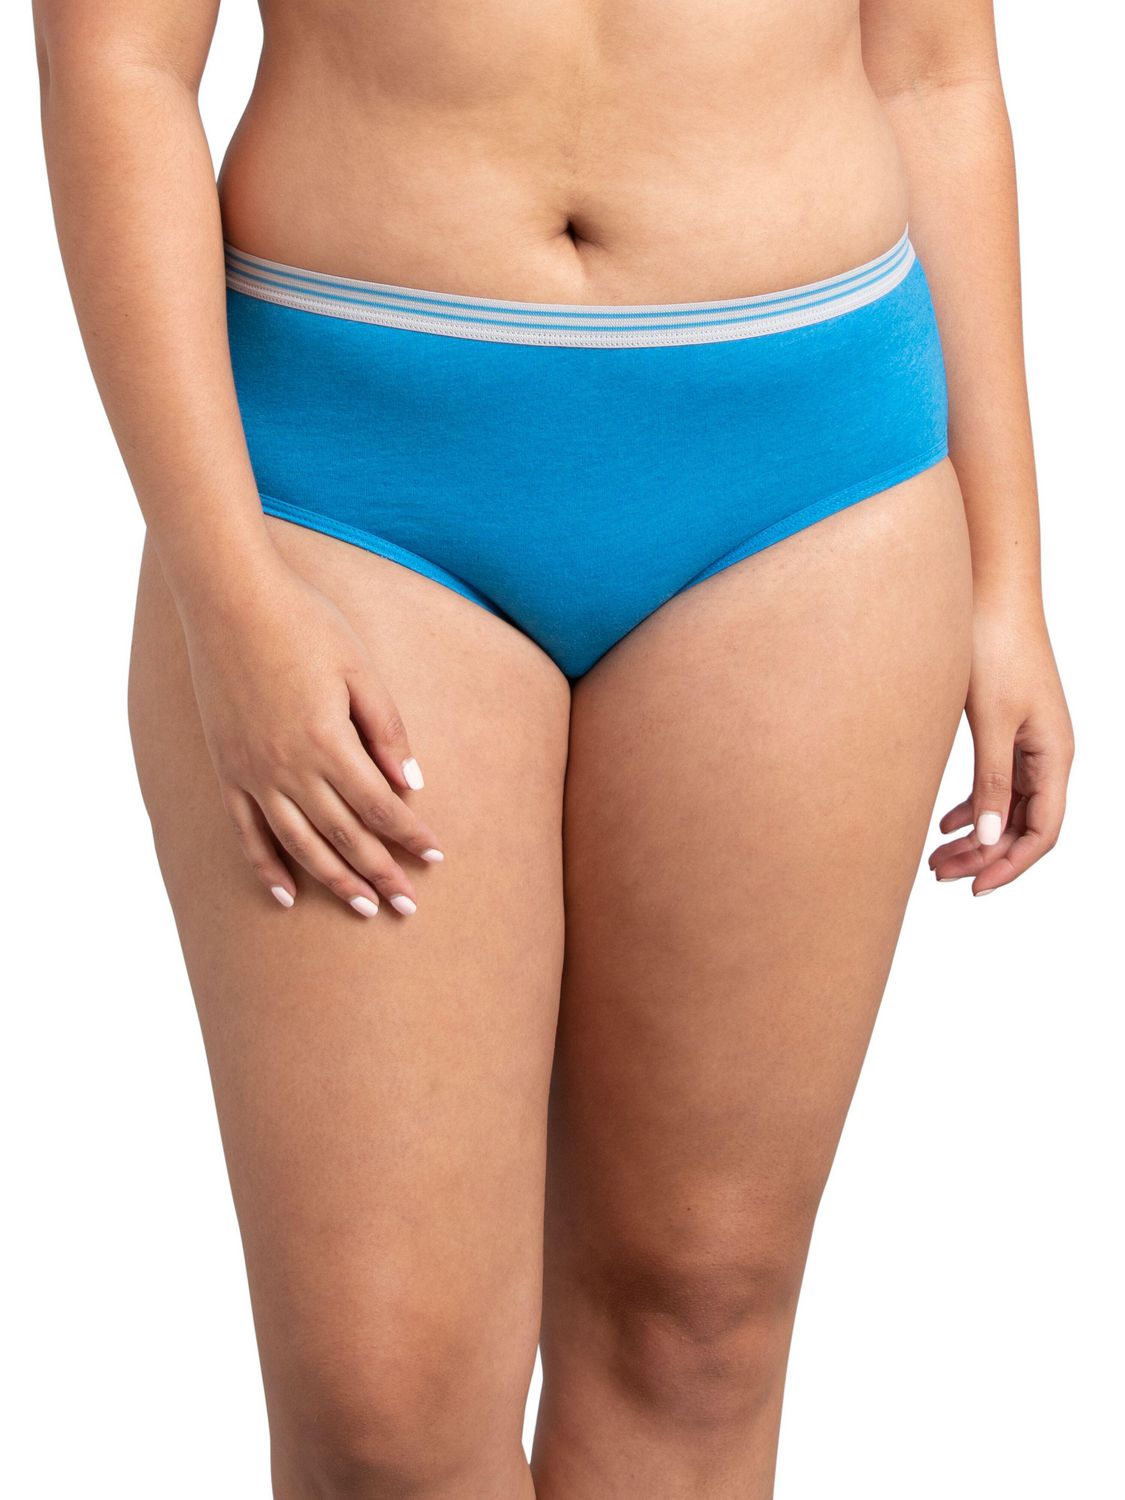 Fruit of the Loom Women's Heather Low Rise Briefs, 6-Pack, Sizes 5-9